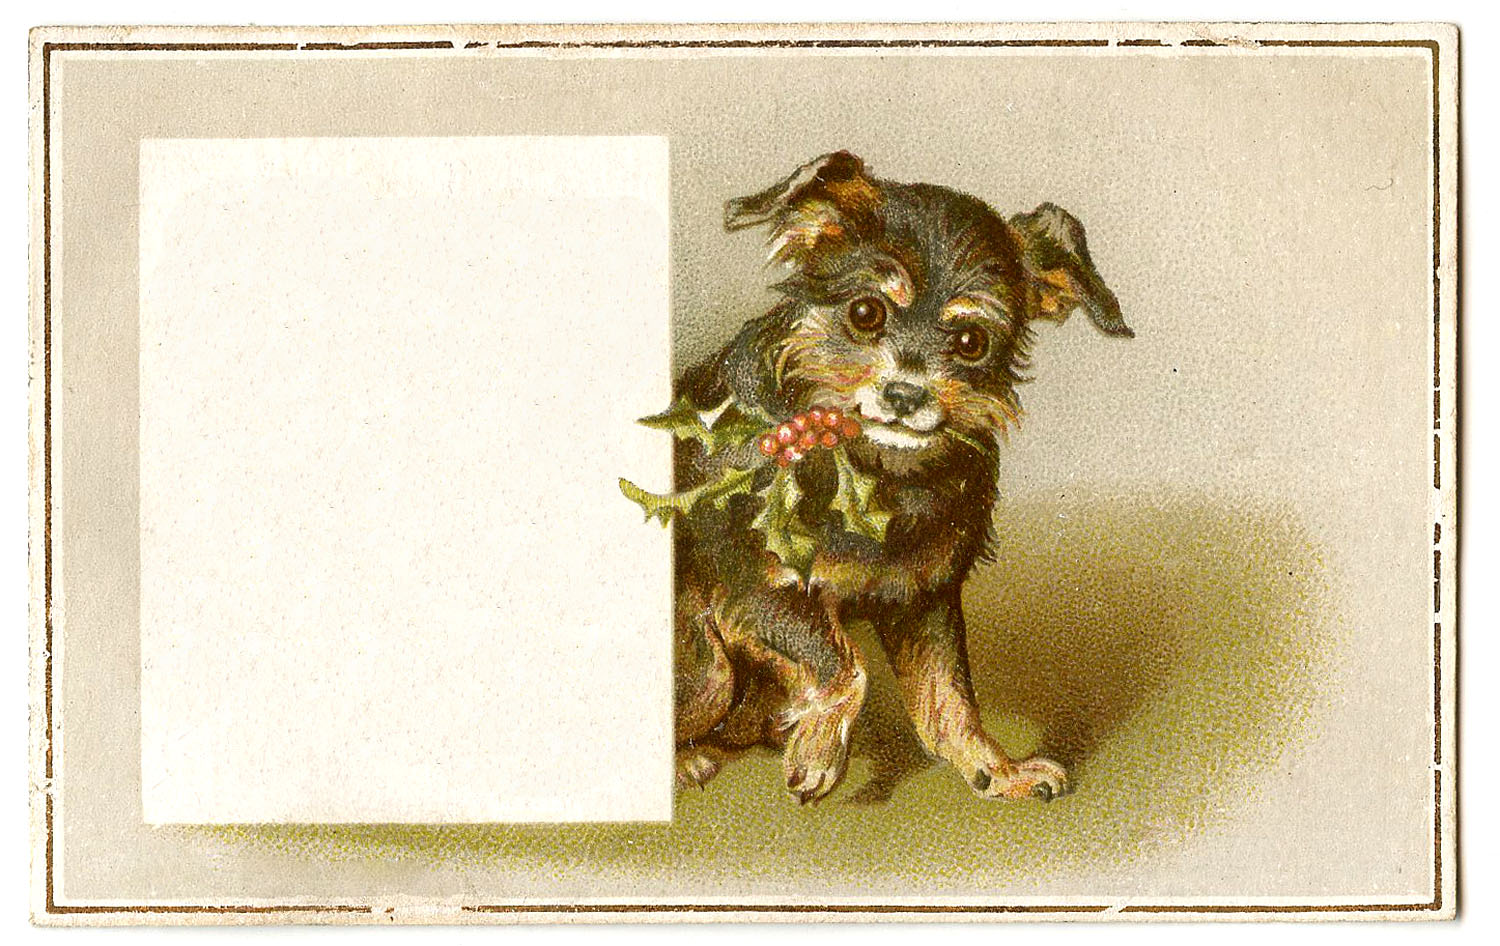 Antique Christmas Images - Dog with Holly - The Graphics Fairy